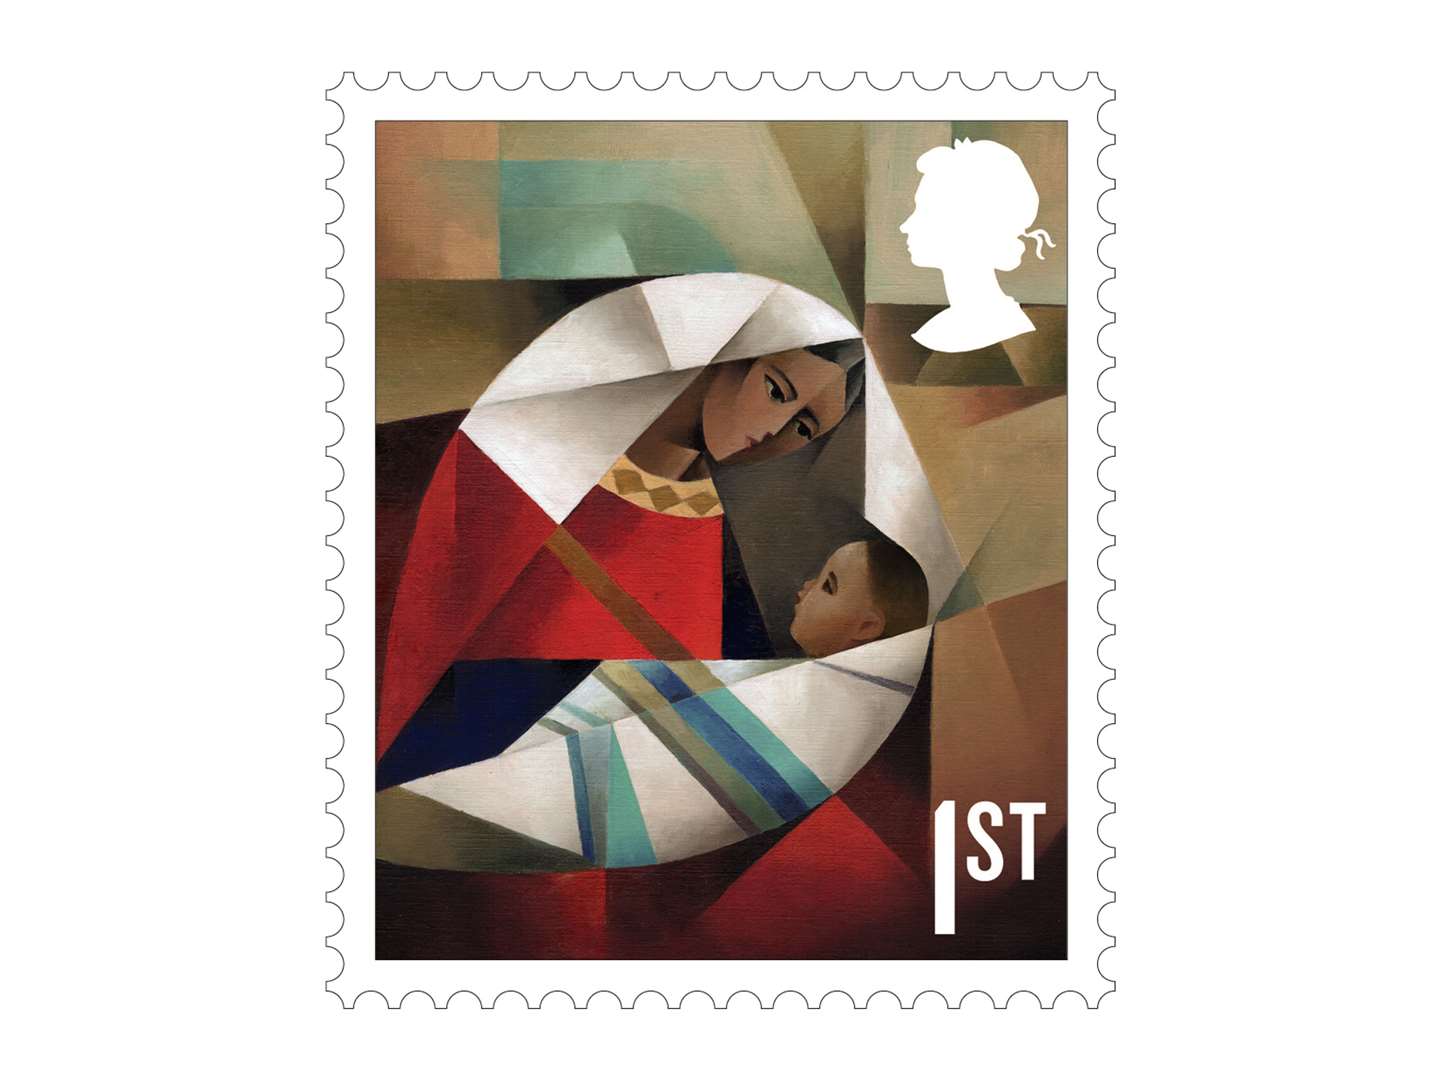 Christmas stamps for 2021, illustrated by international artist Jorge Cocco